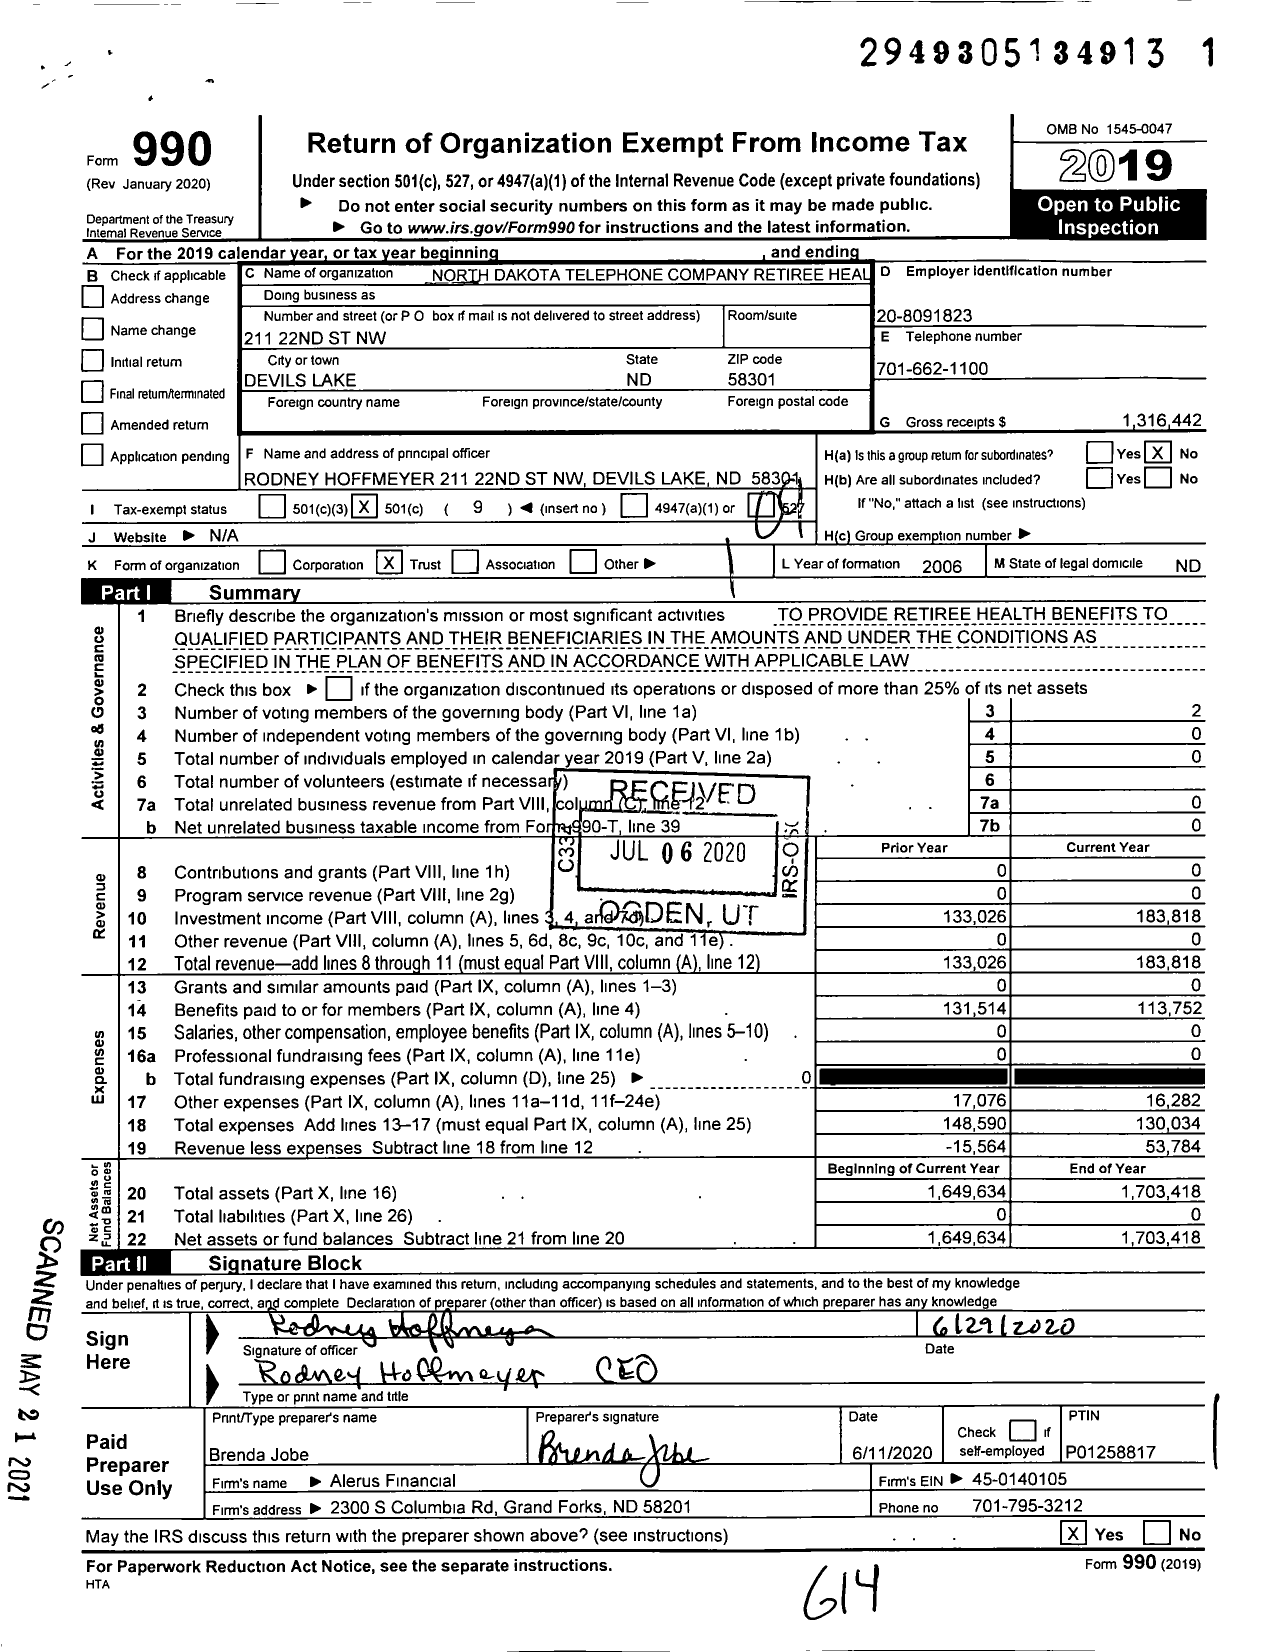 Image of first page of 2019 Form 990O for North Dakota Telephone Company Retiree